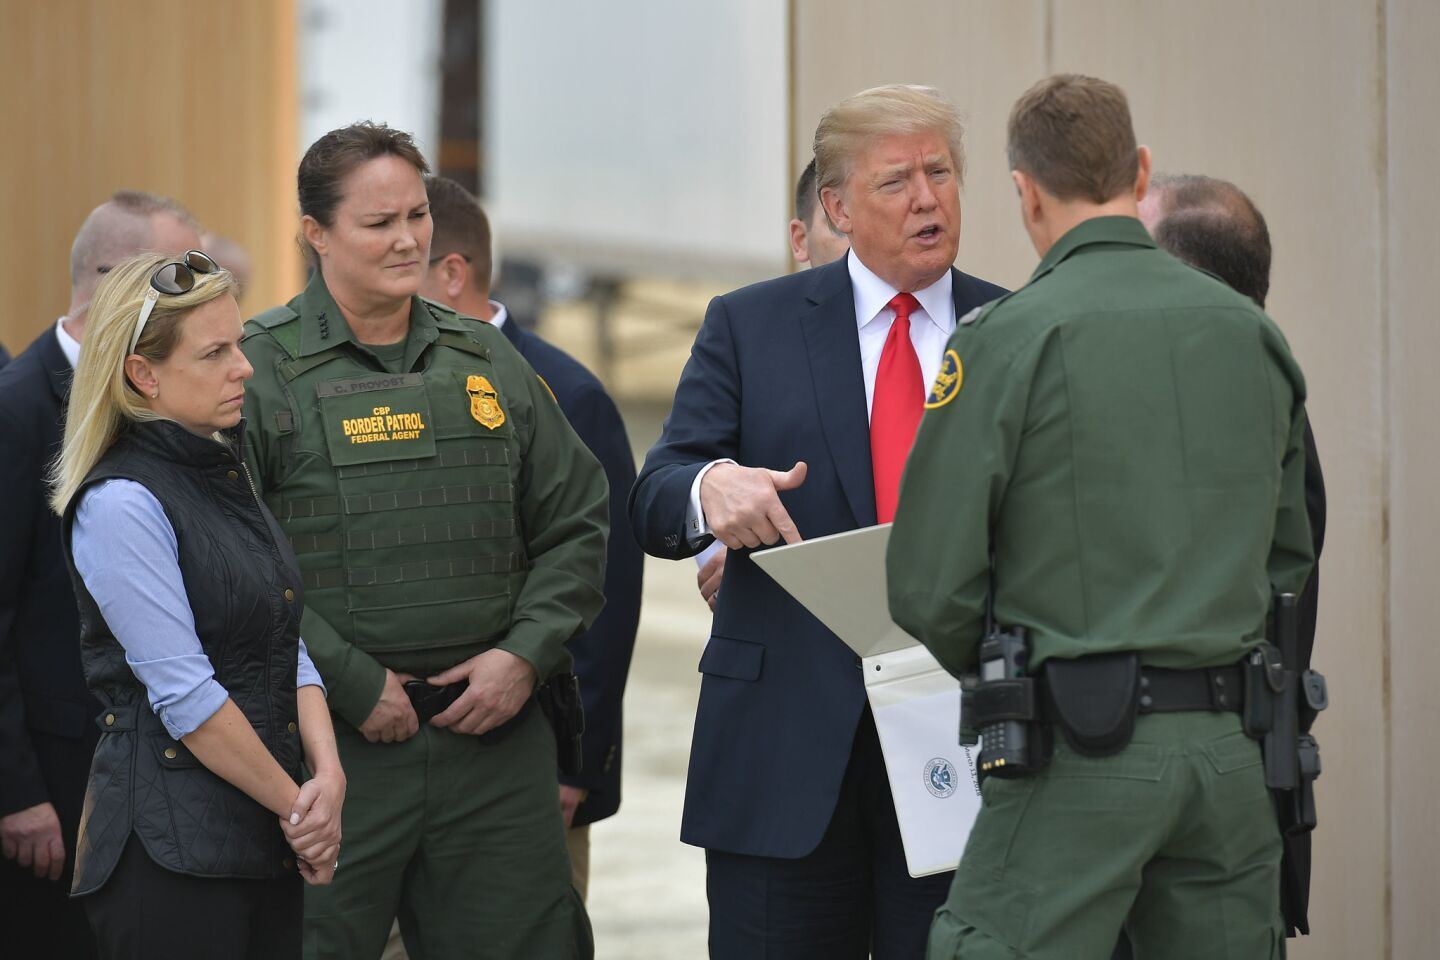 President Trump asks questions about proposed border wall prototypes near San Diego on March 13.